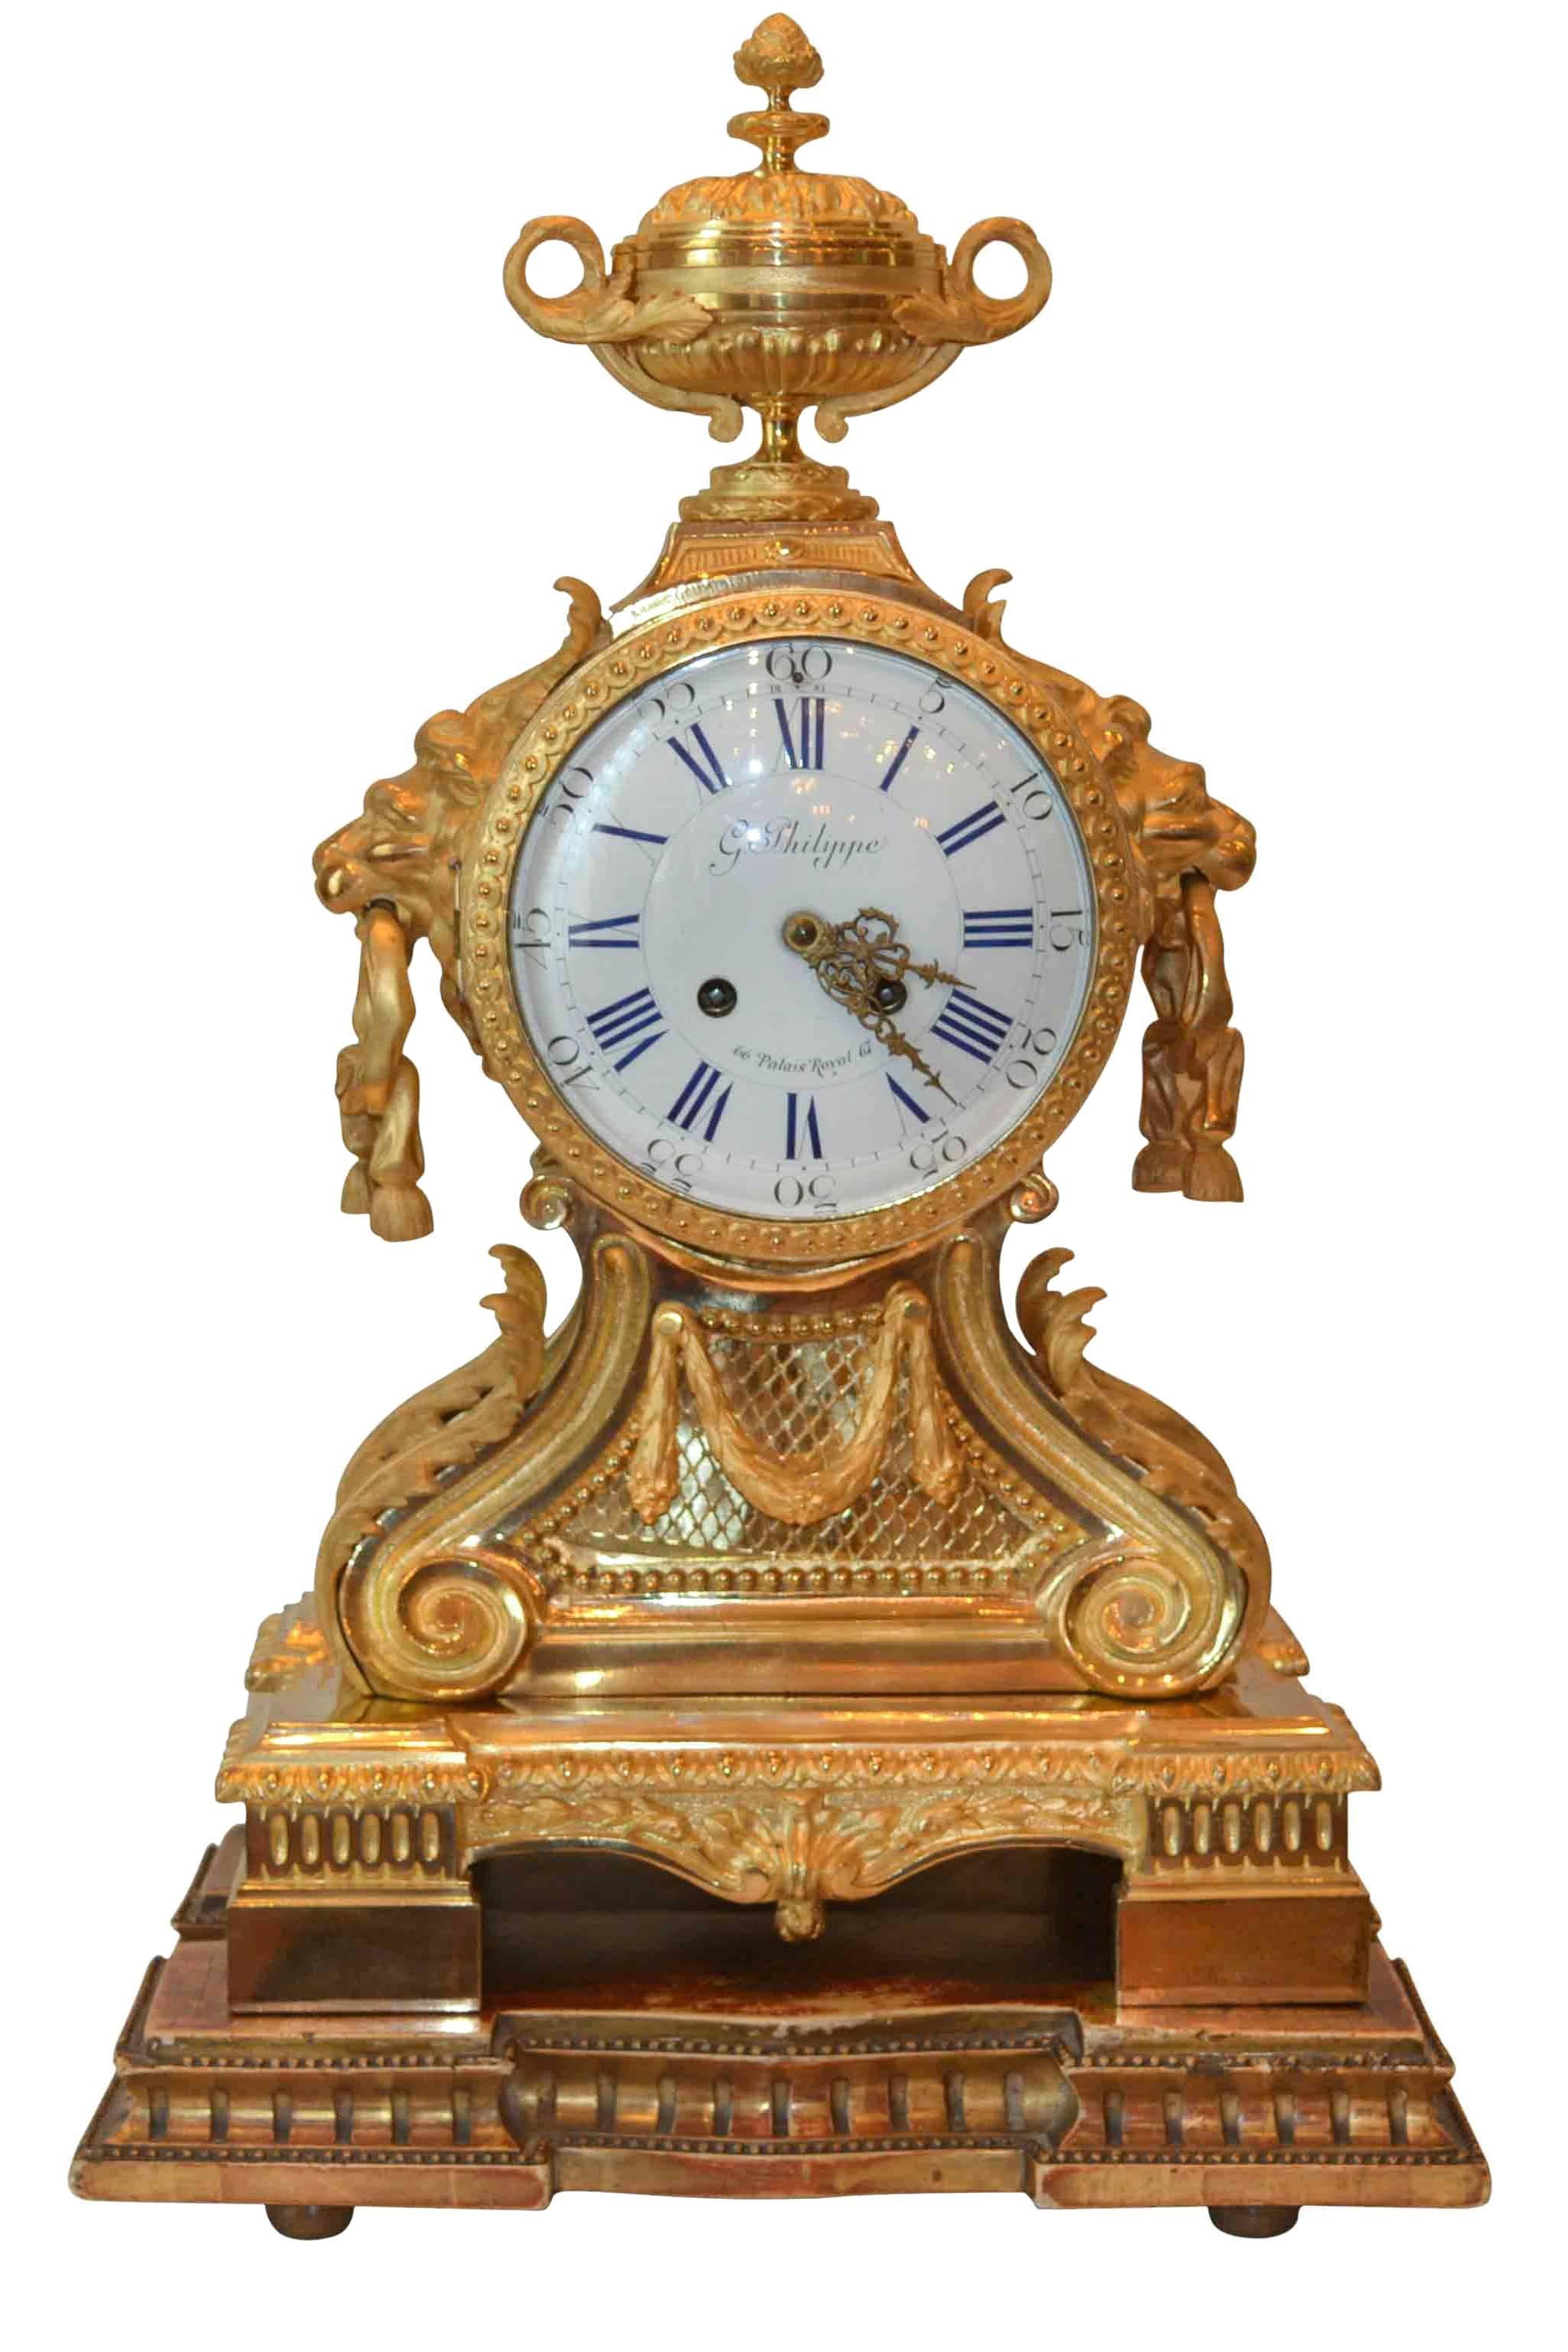 A gilt and chiseled bronze lion's head mantel clock with lion's head masks and decoration of interlacing frieze, laurel leaf cascades, cross-bars and acanthus leaves. Surmounted by a flambeau urn, the whole atop plinth with four feet.

White